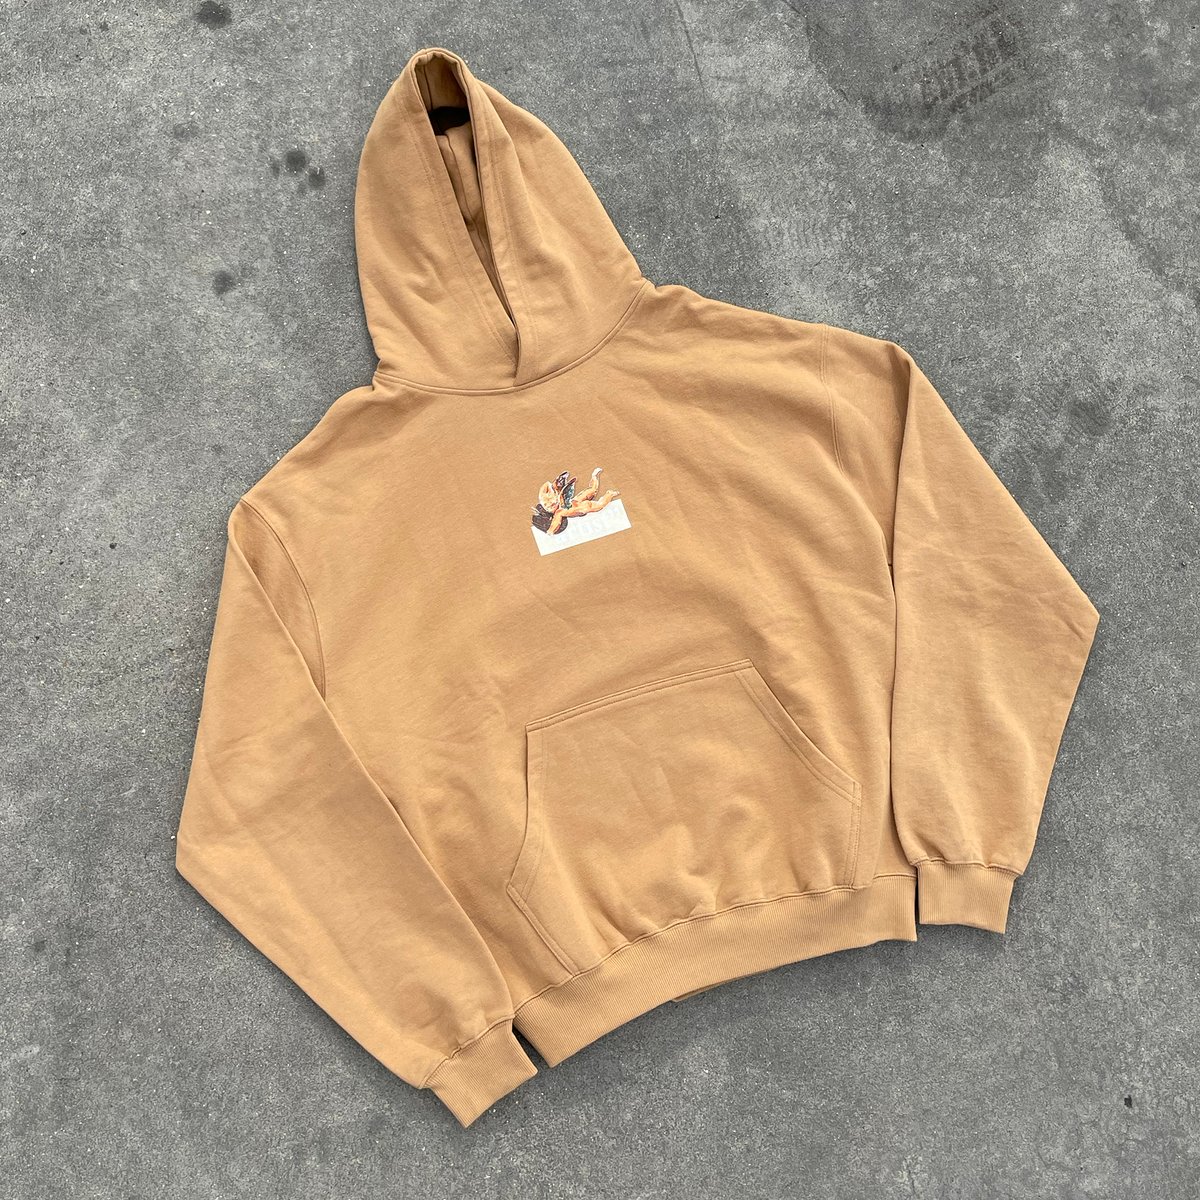 Image of Cappuccino "ARTIST" Boxlogo Perfect hoodie